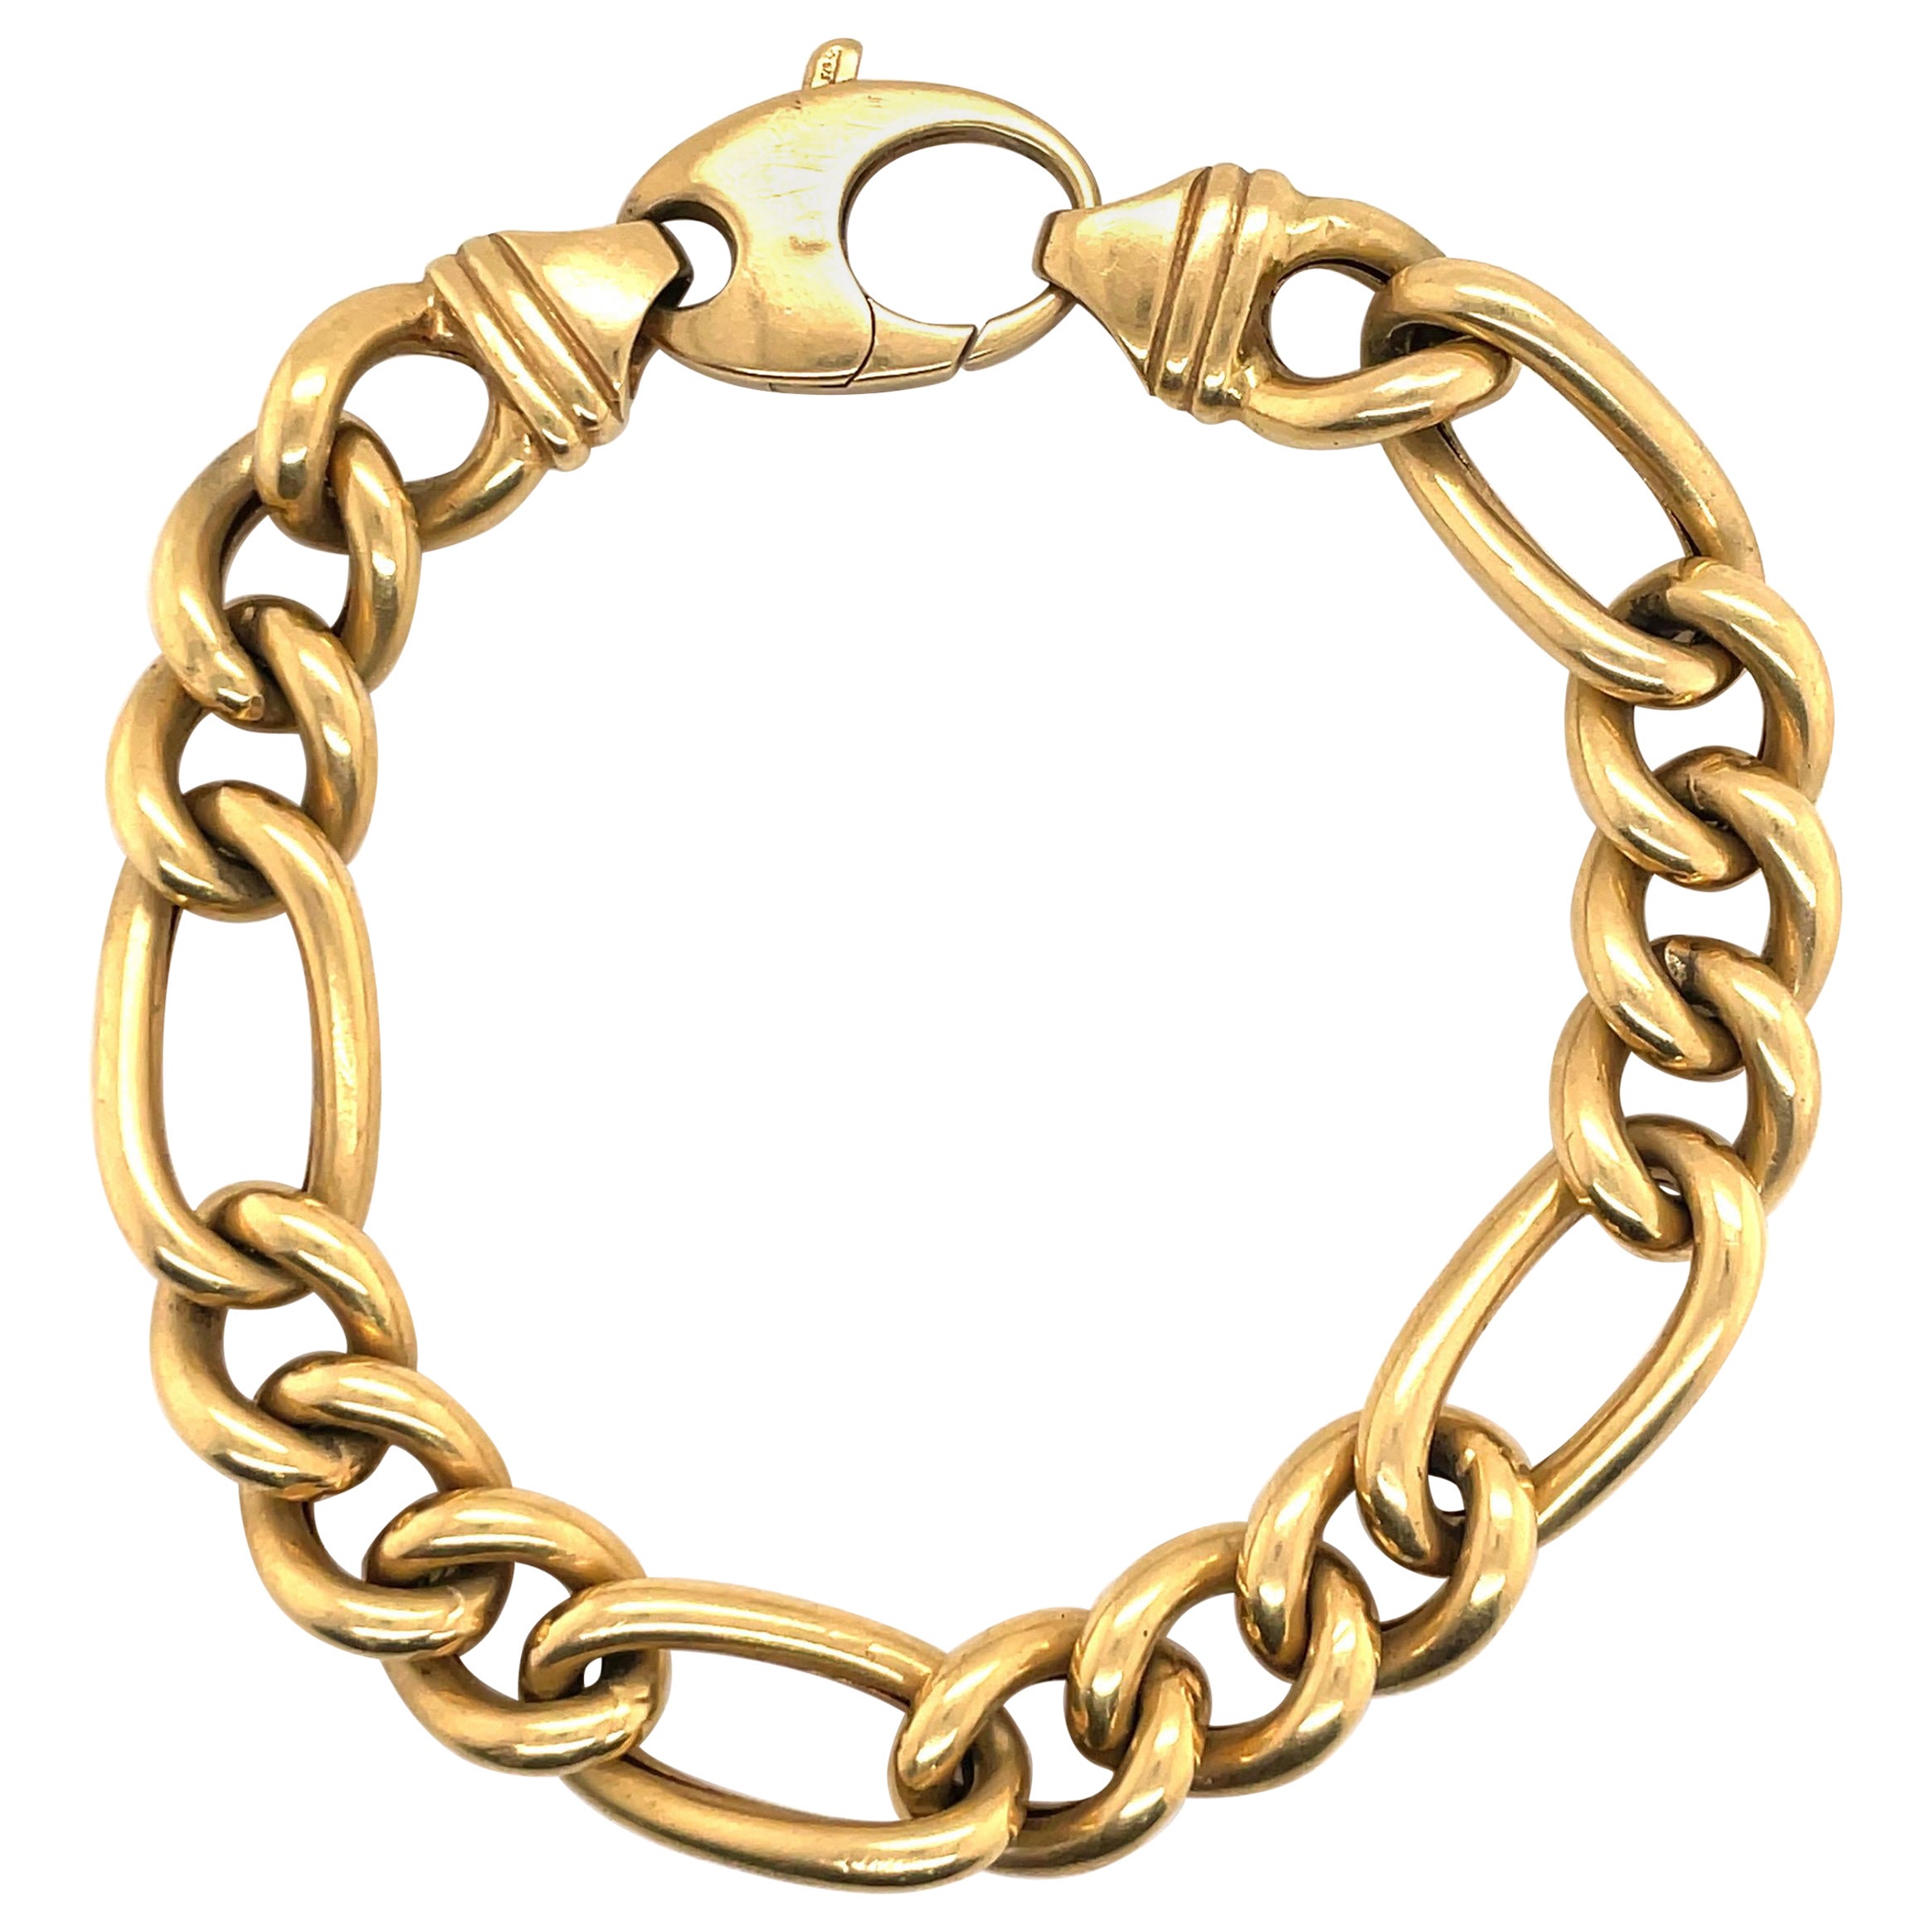 Platinum 18 Karat Yellow Gold Link Bracelet 10.8 Grams Made in Italy For  Sale at 1stDibs | venetian link bracelet in 18k gold, 10.8 grams of gold,  18k gold bracelet made in italy